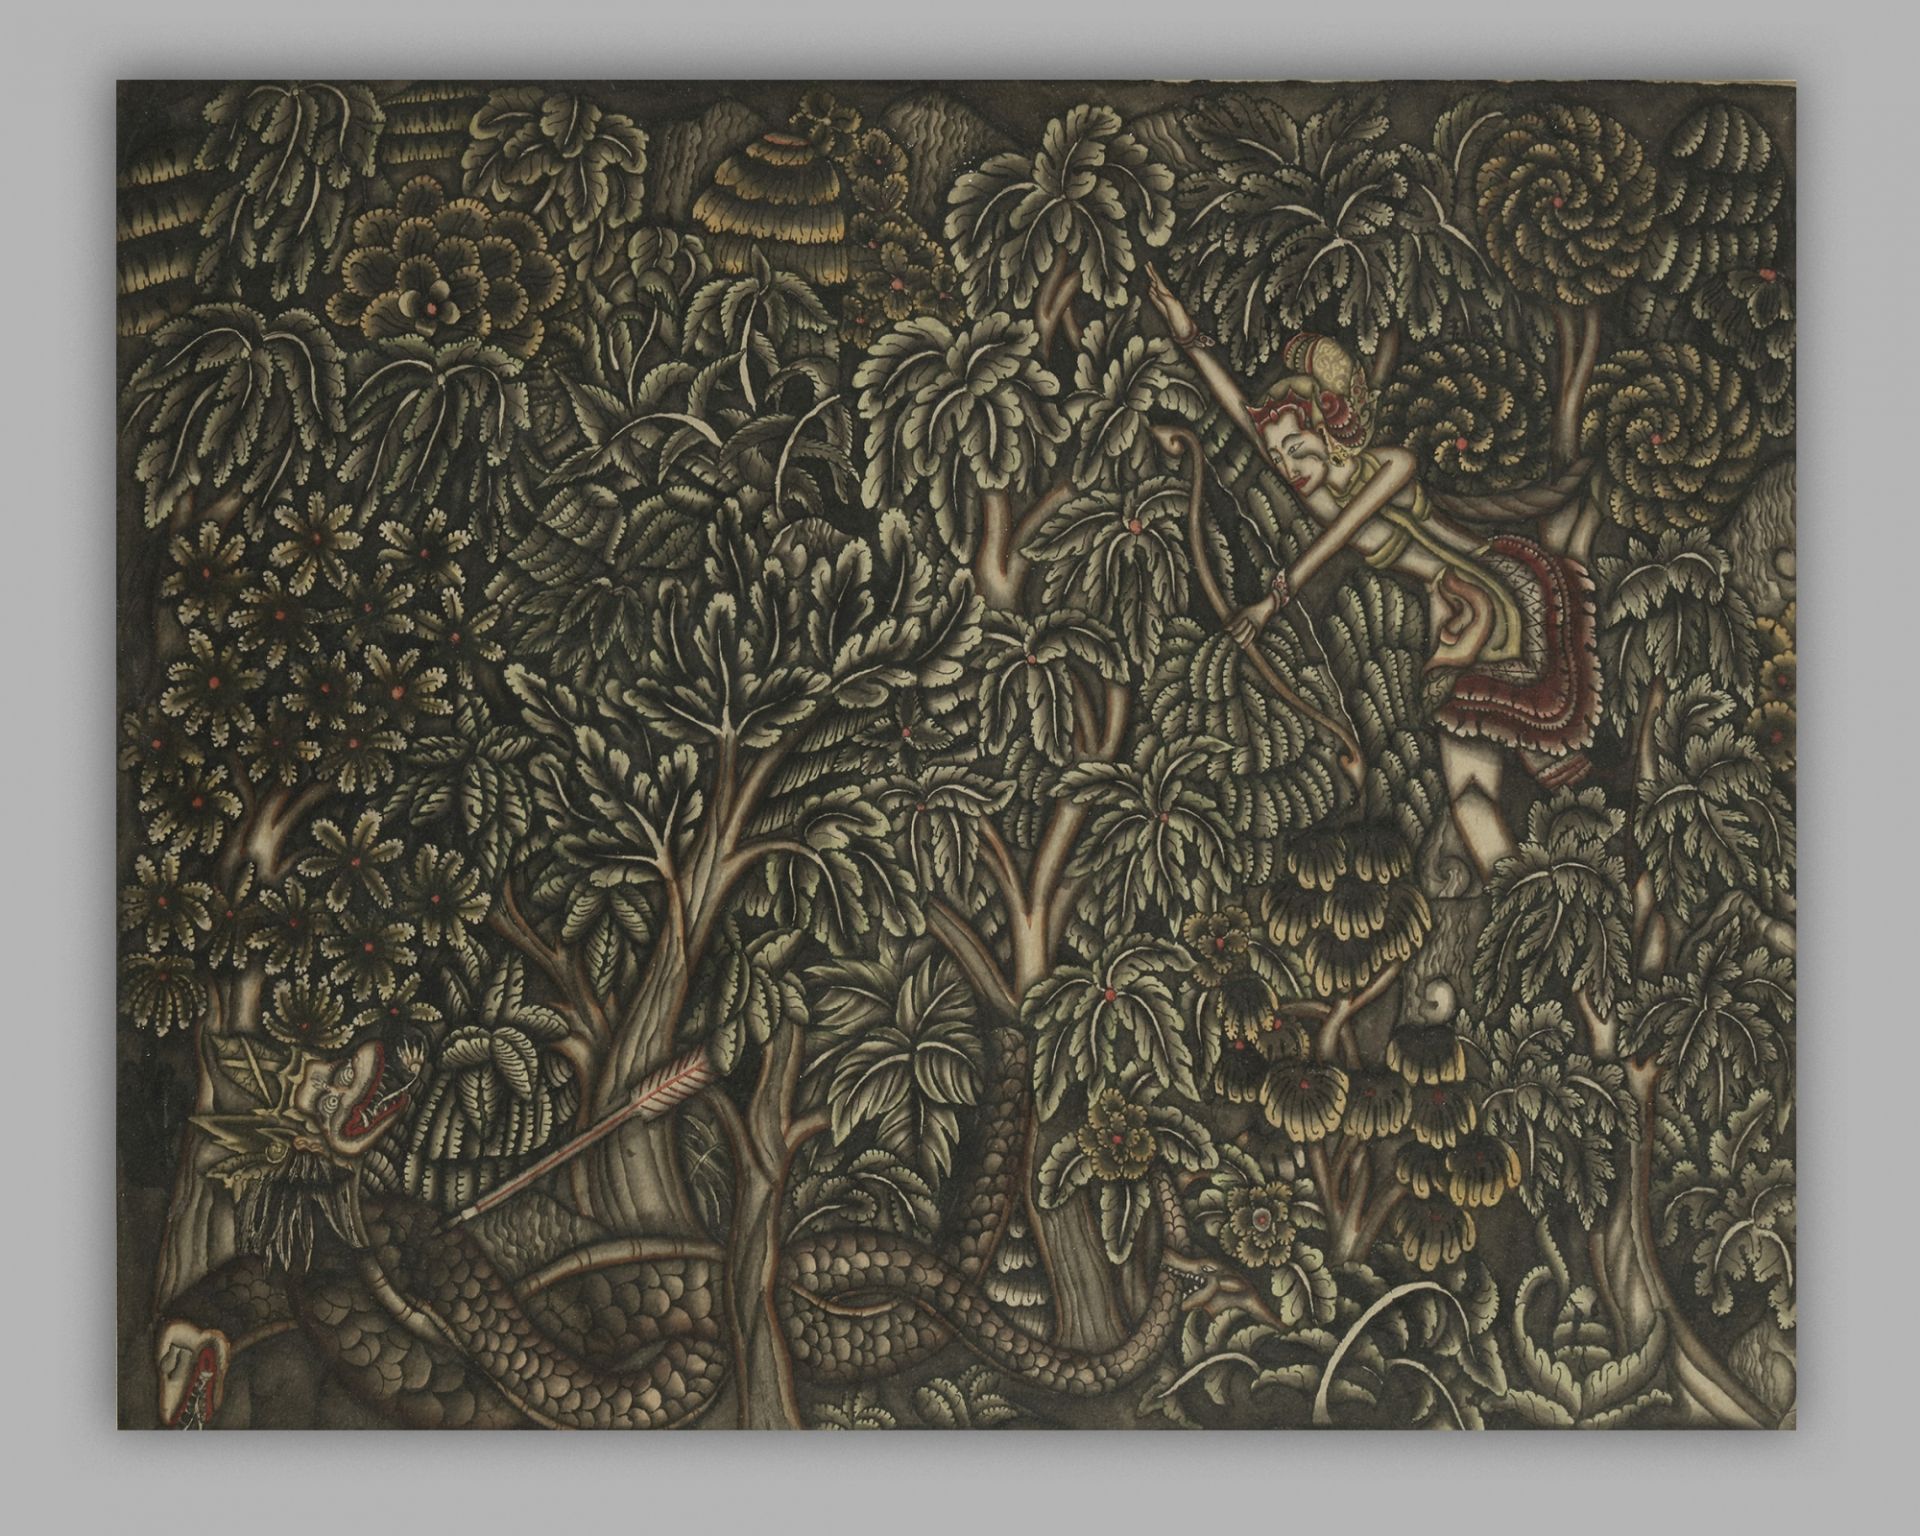 A Ubud painting depicting an archer and a snake